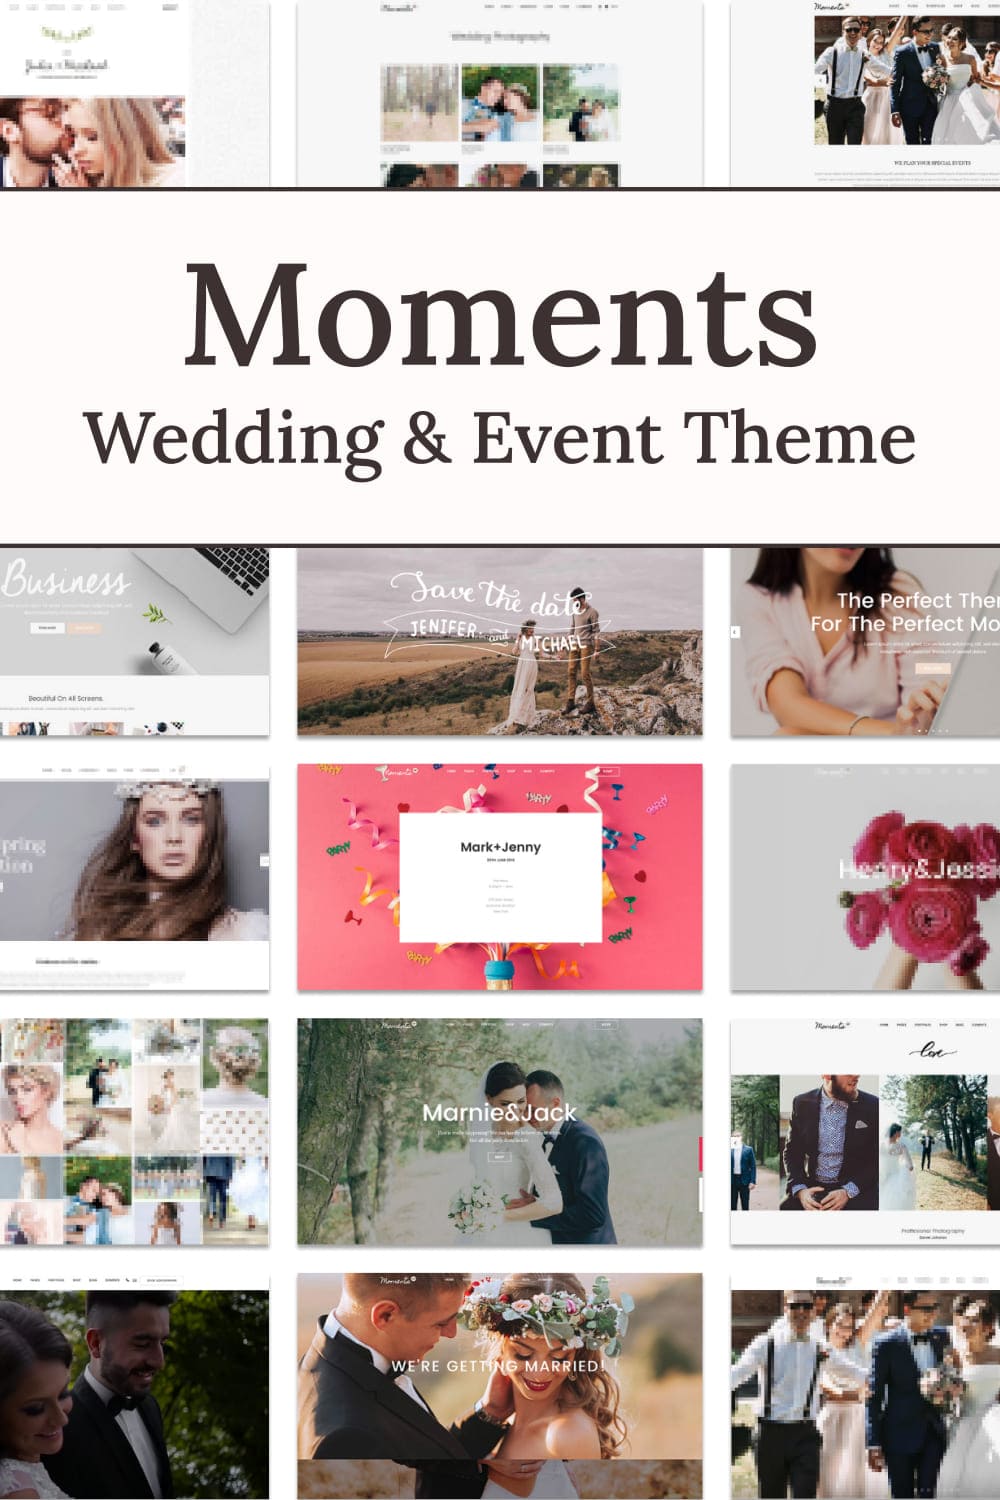 Moments wedding event theme, picture for pinterest 1000x1500.